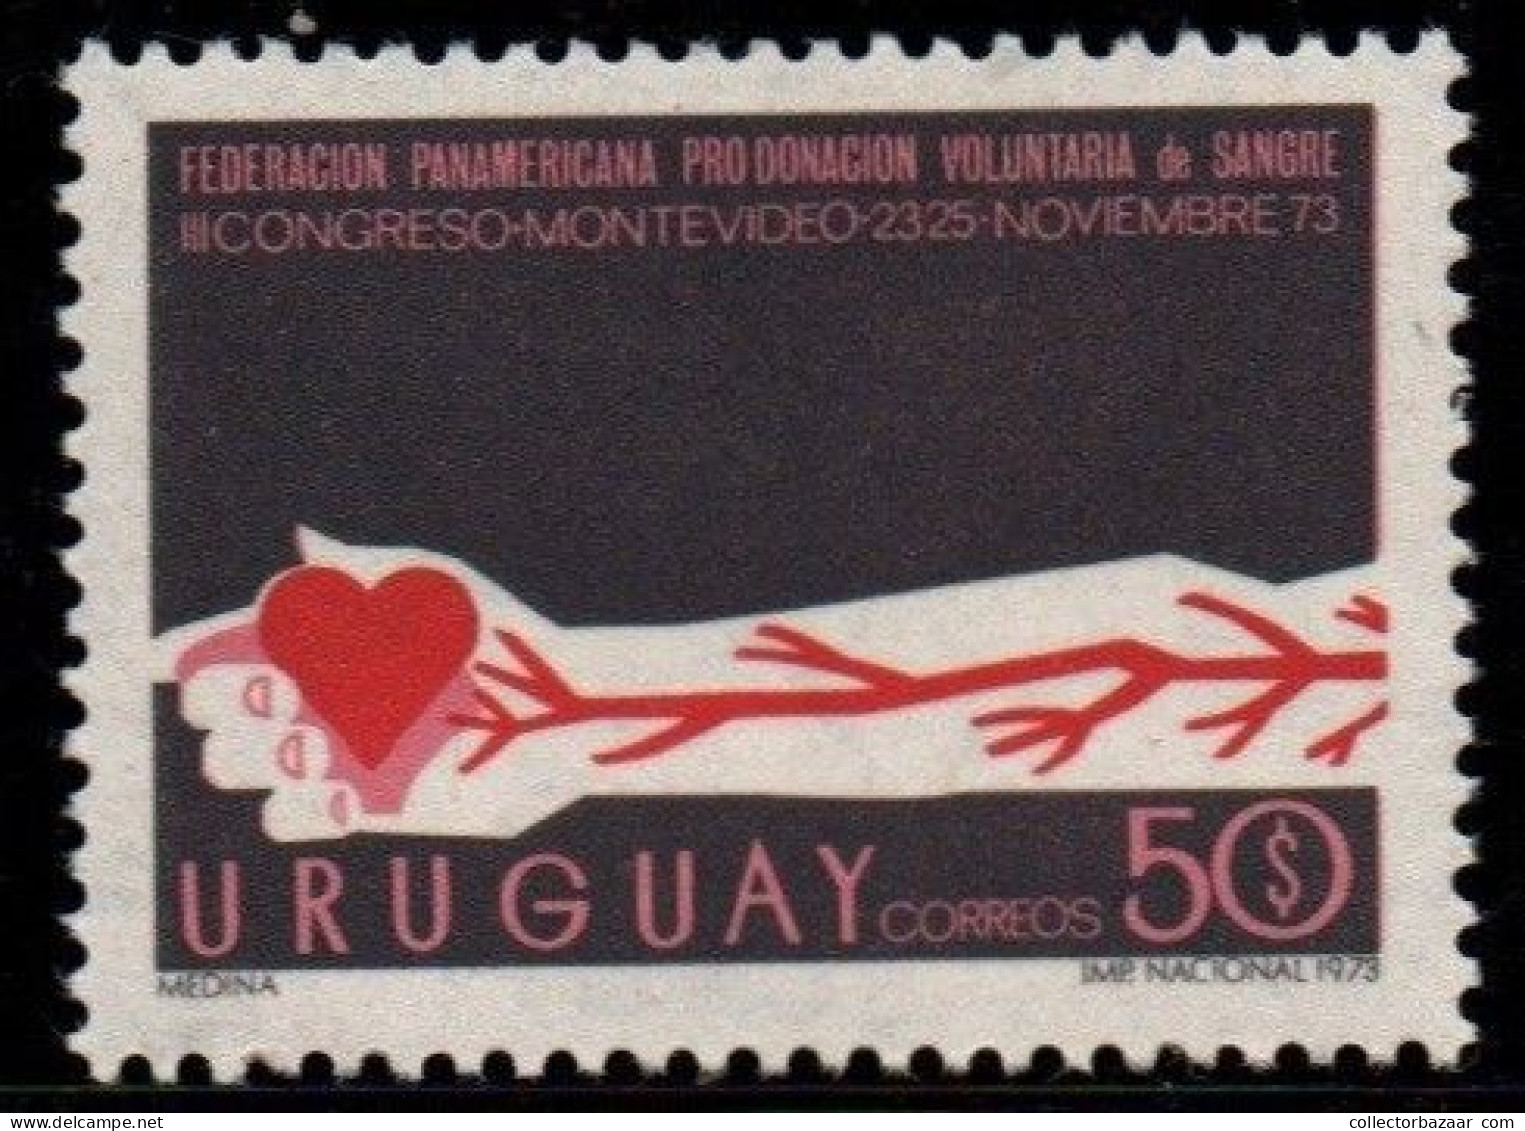 1973 Uruguay Arm With Arteries And Heart  #868 ** MNH - Uruguay